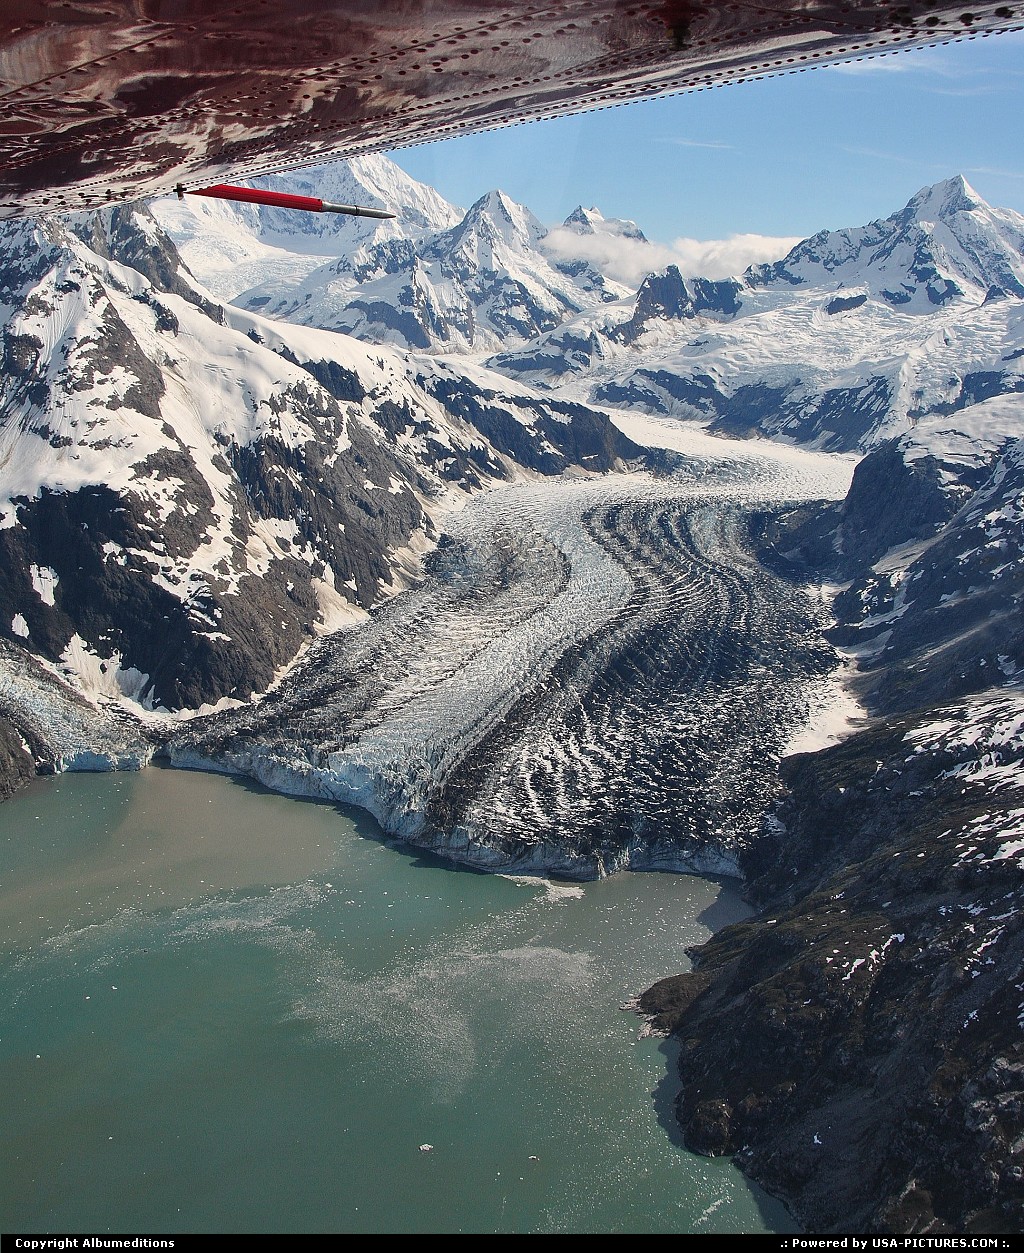 Picture by Albumeditions: Not in a City Alaska   Alaska, Glaciers